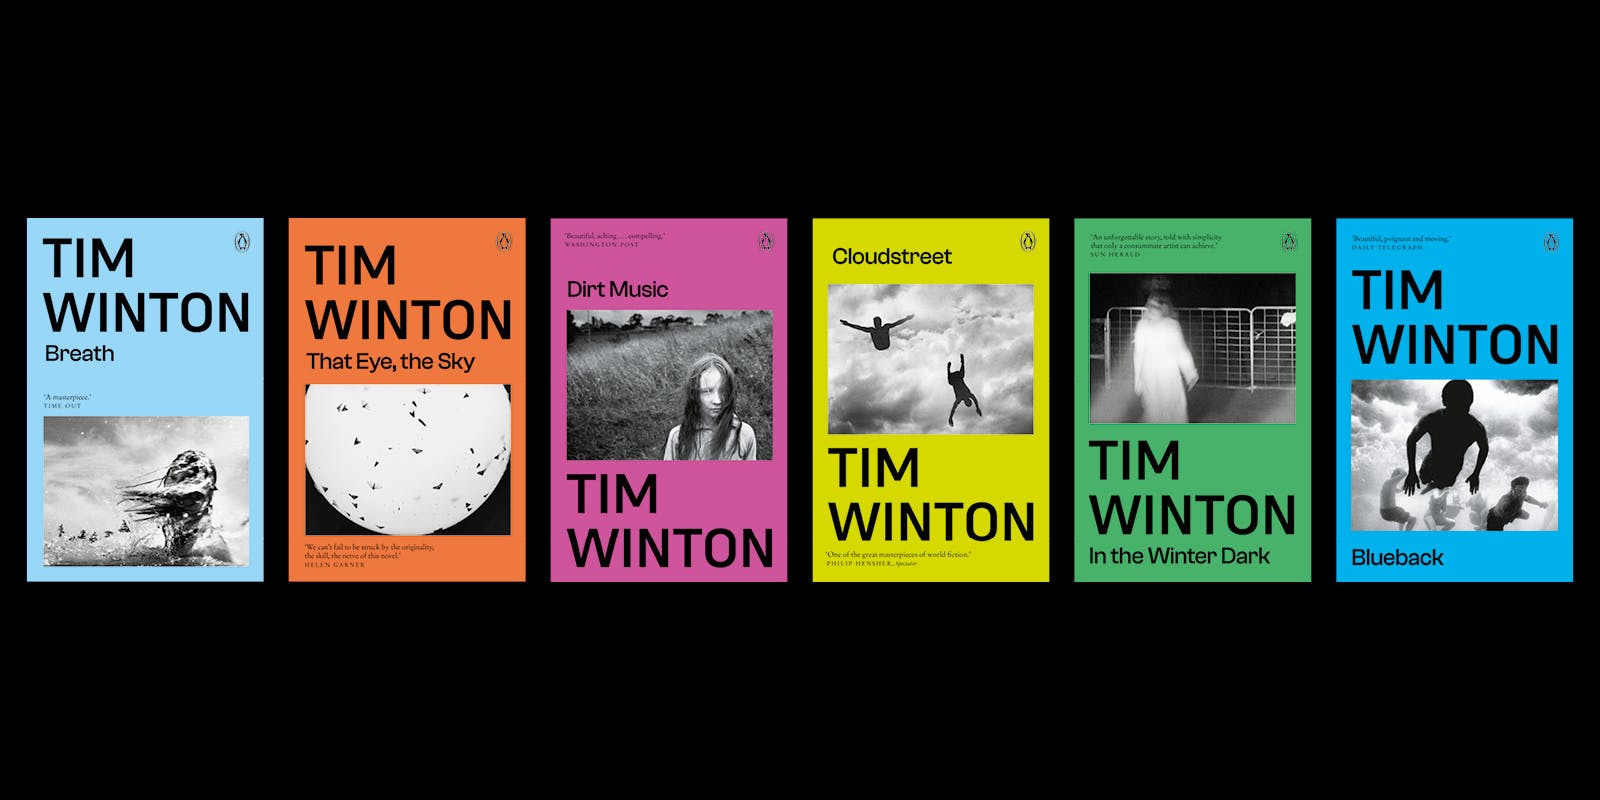 Tim Winton unveils new book covers